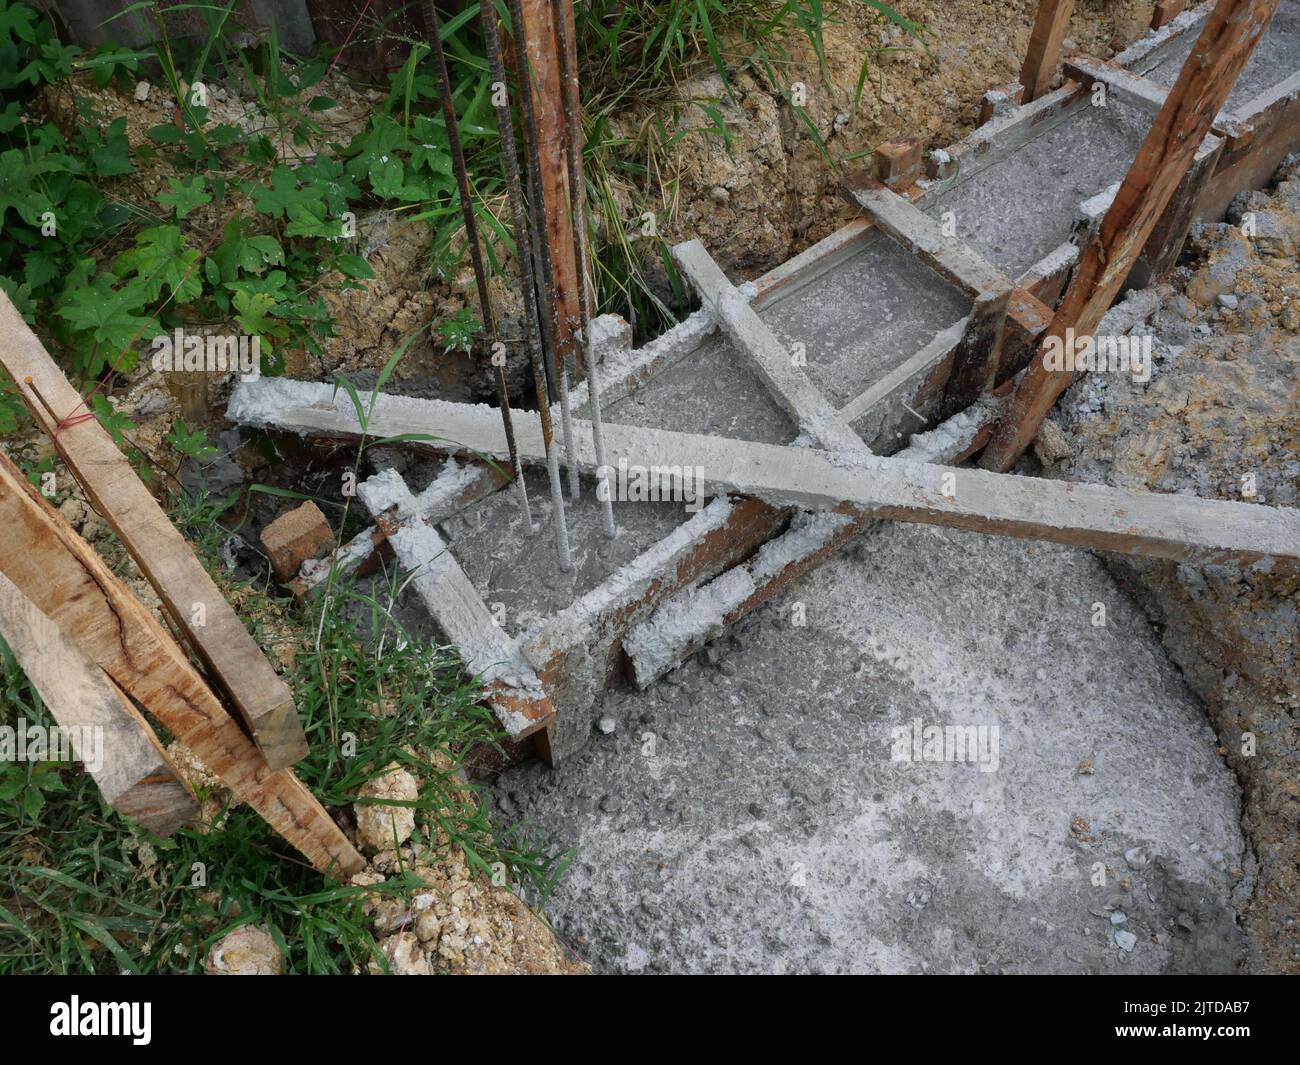 Filling reinforced beam with the concrete reinforcement frame, Timber formwork with metal reinforcement for pouring concrete Stock Photo